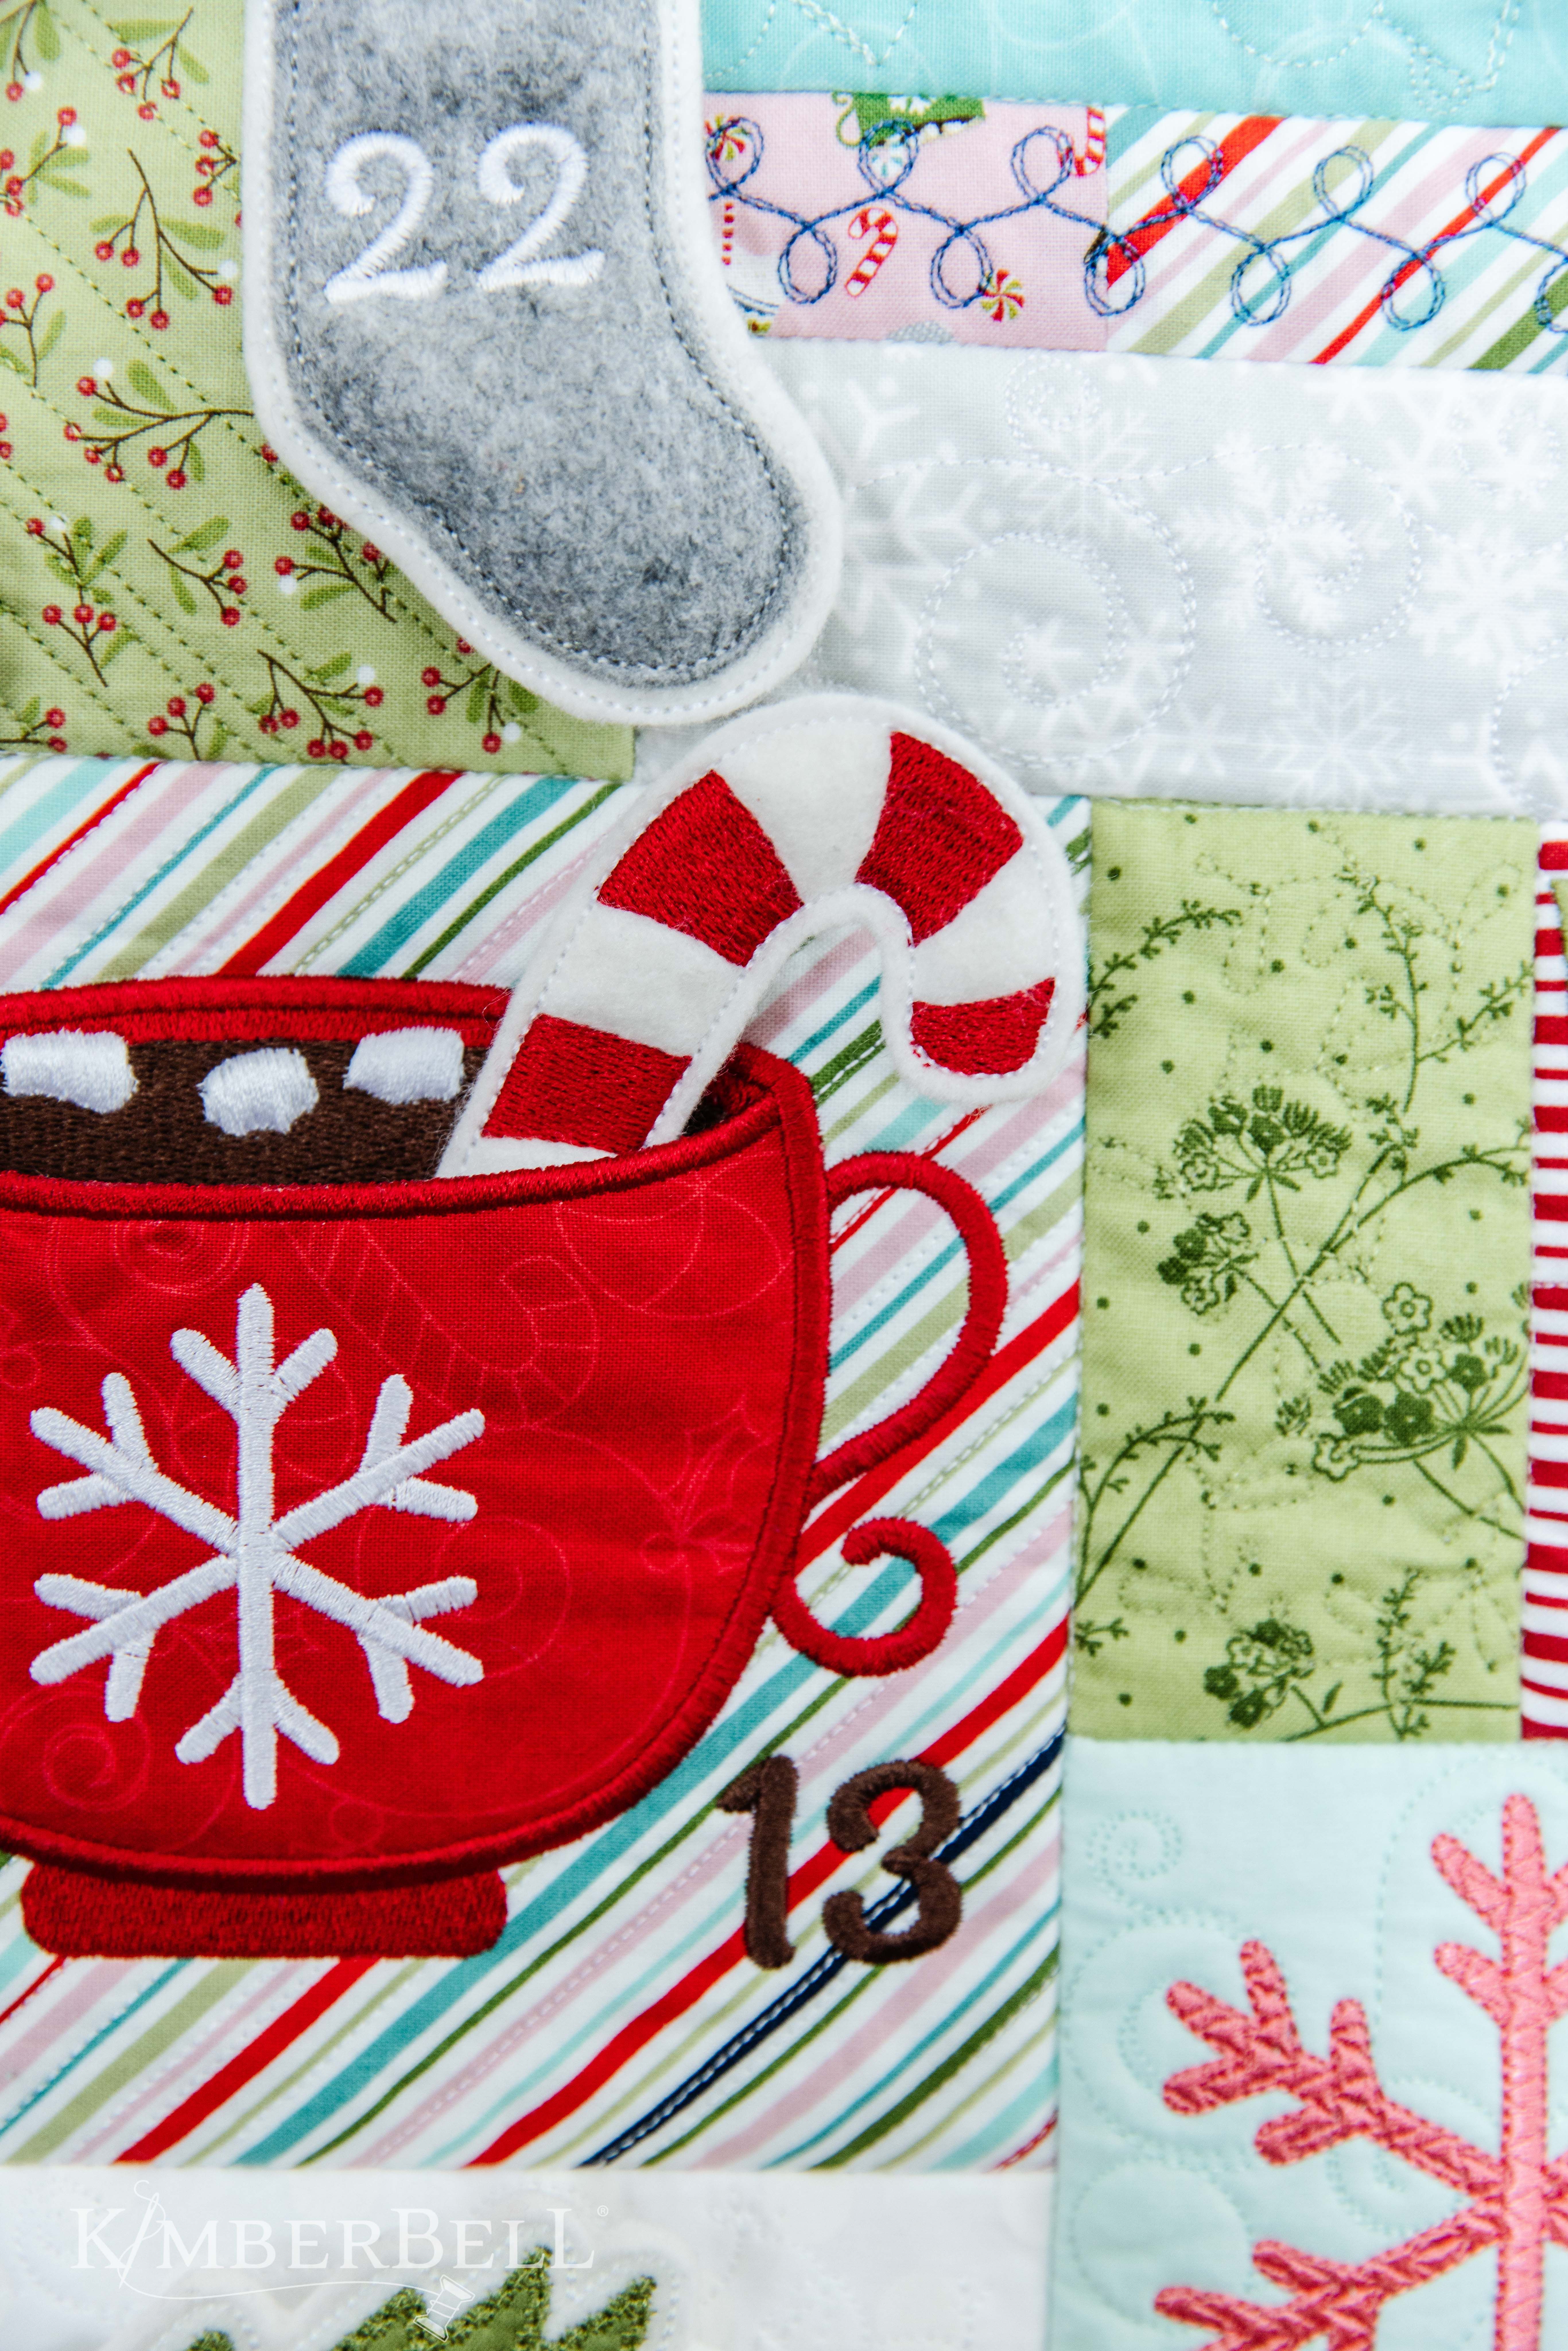 Cup of Cheer Advent Quilt Items Kimberbell - 95368522